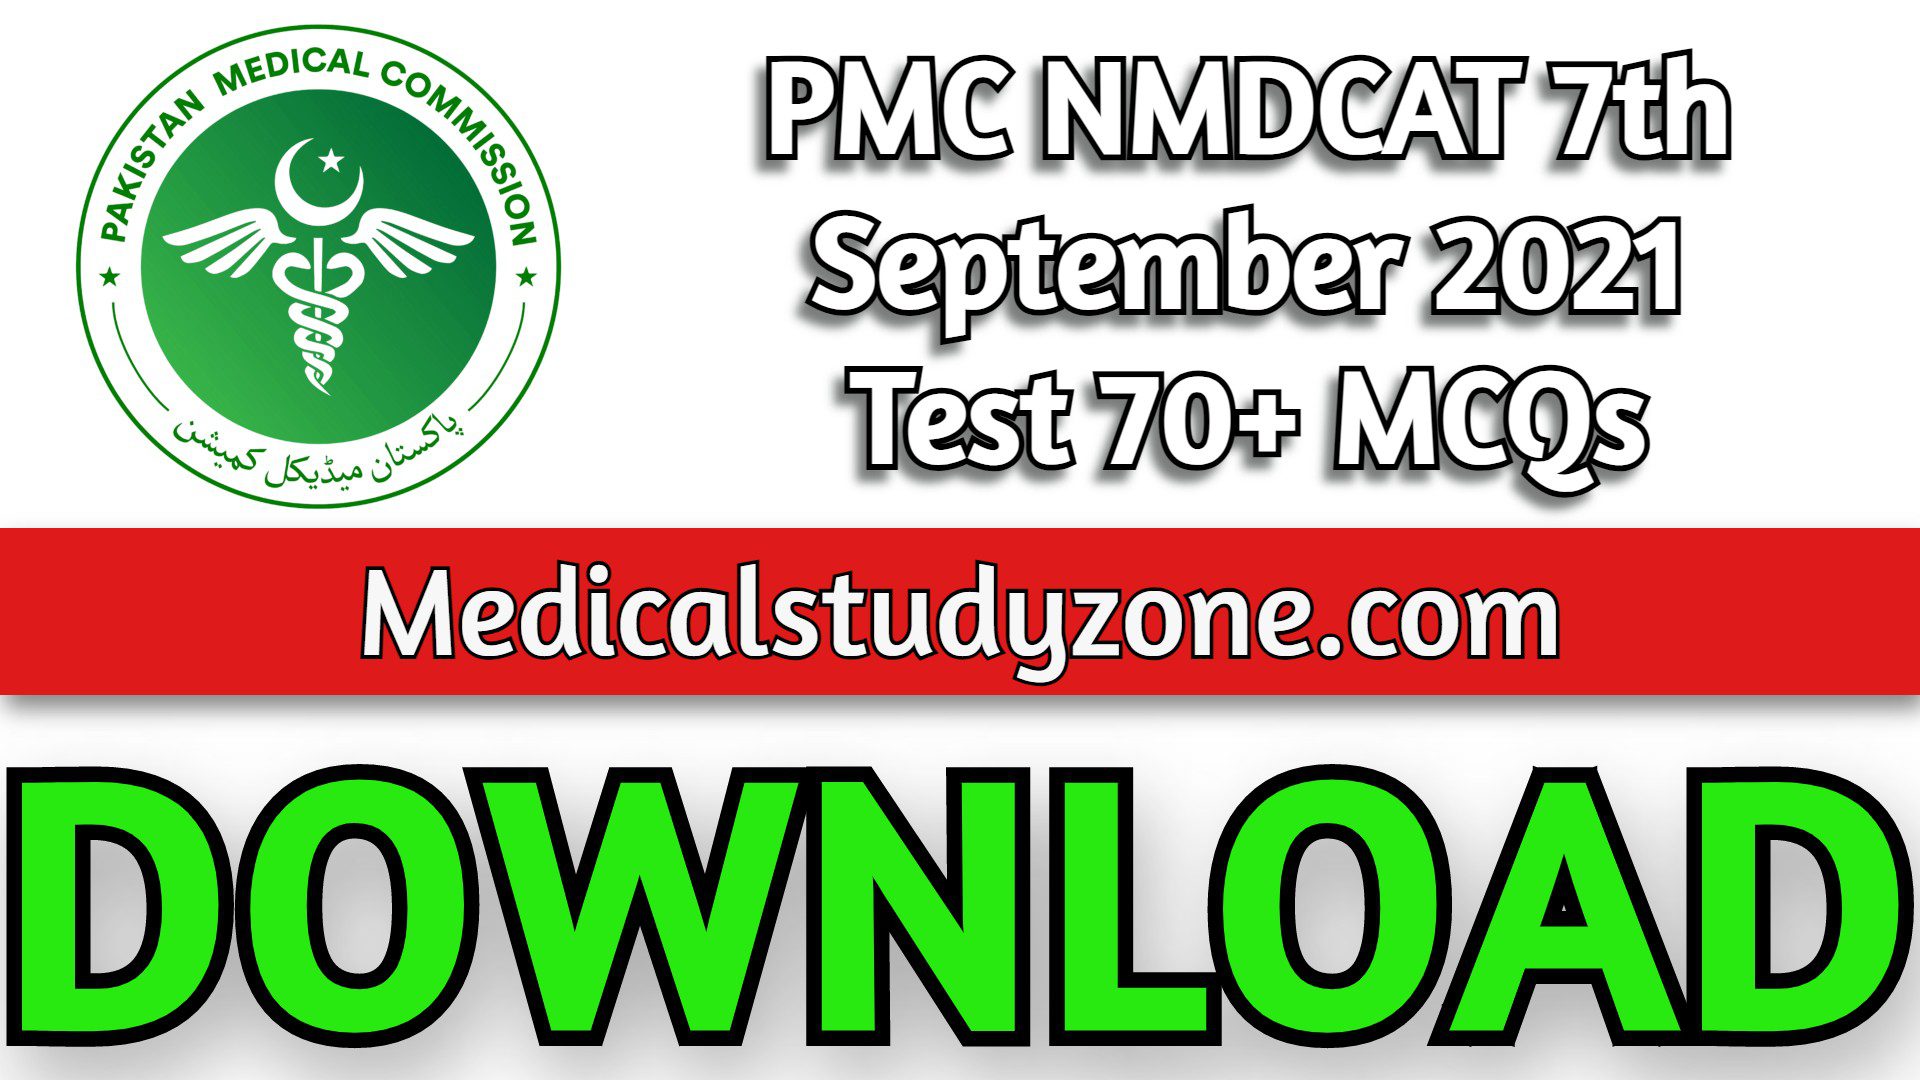 PMC NMDCAT 7th September 2021 Test 70+ MCQs Collection PDF Free Download